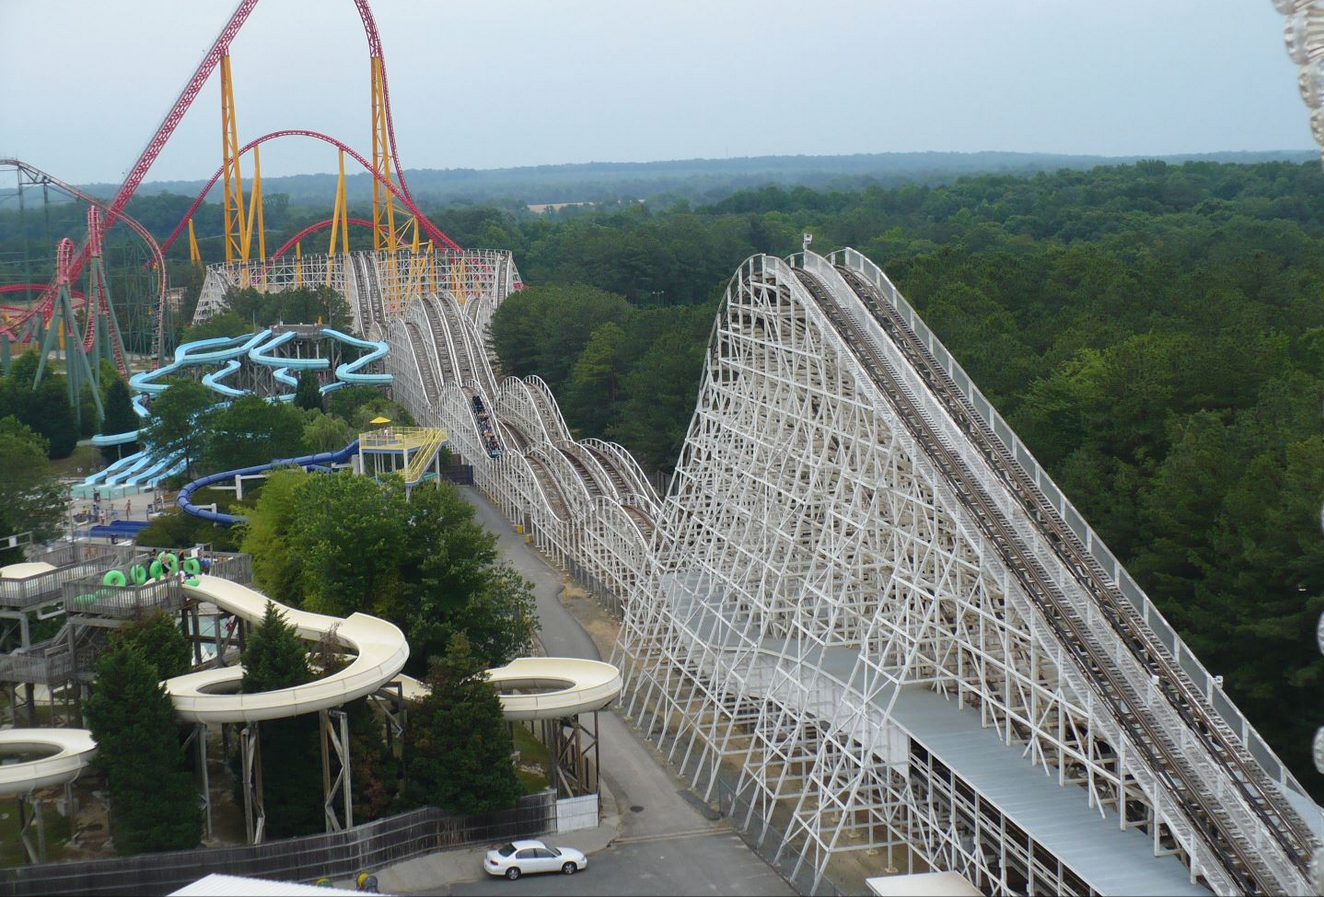 Aerial view of both tracks of Racer 75 during the day, the coaster is painted white.